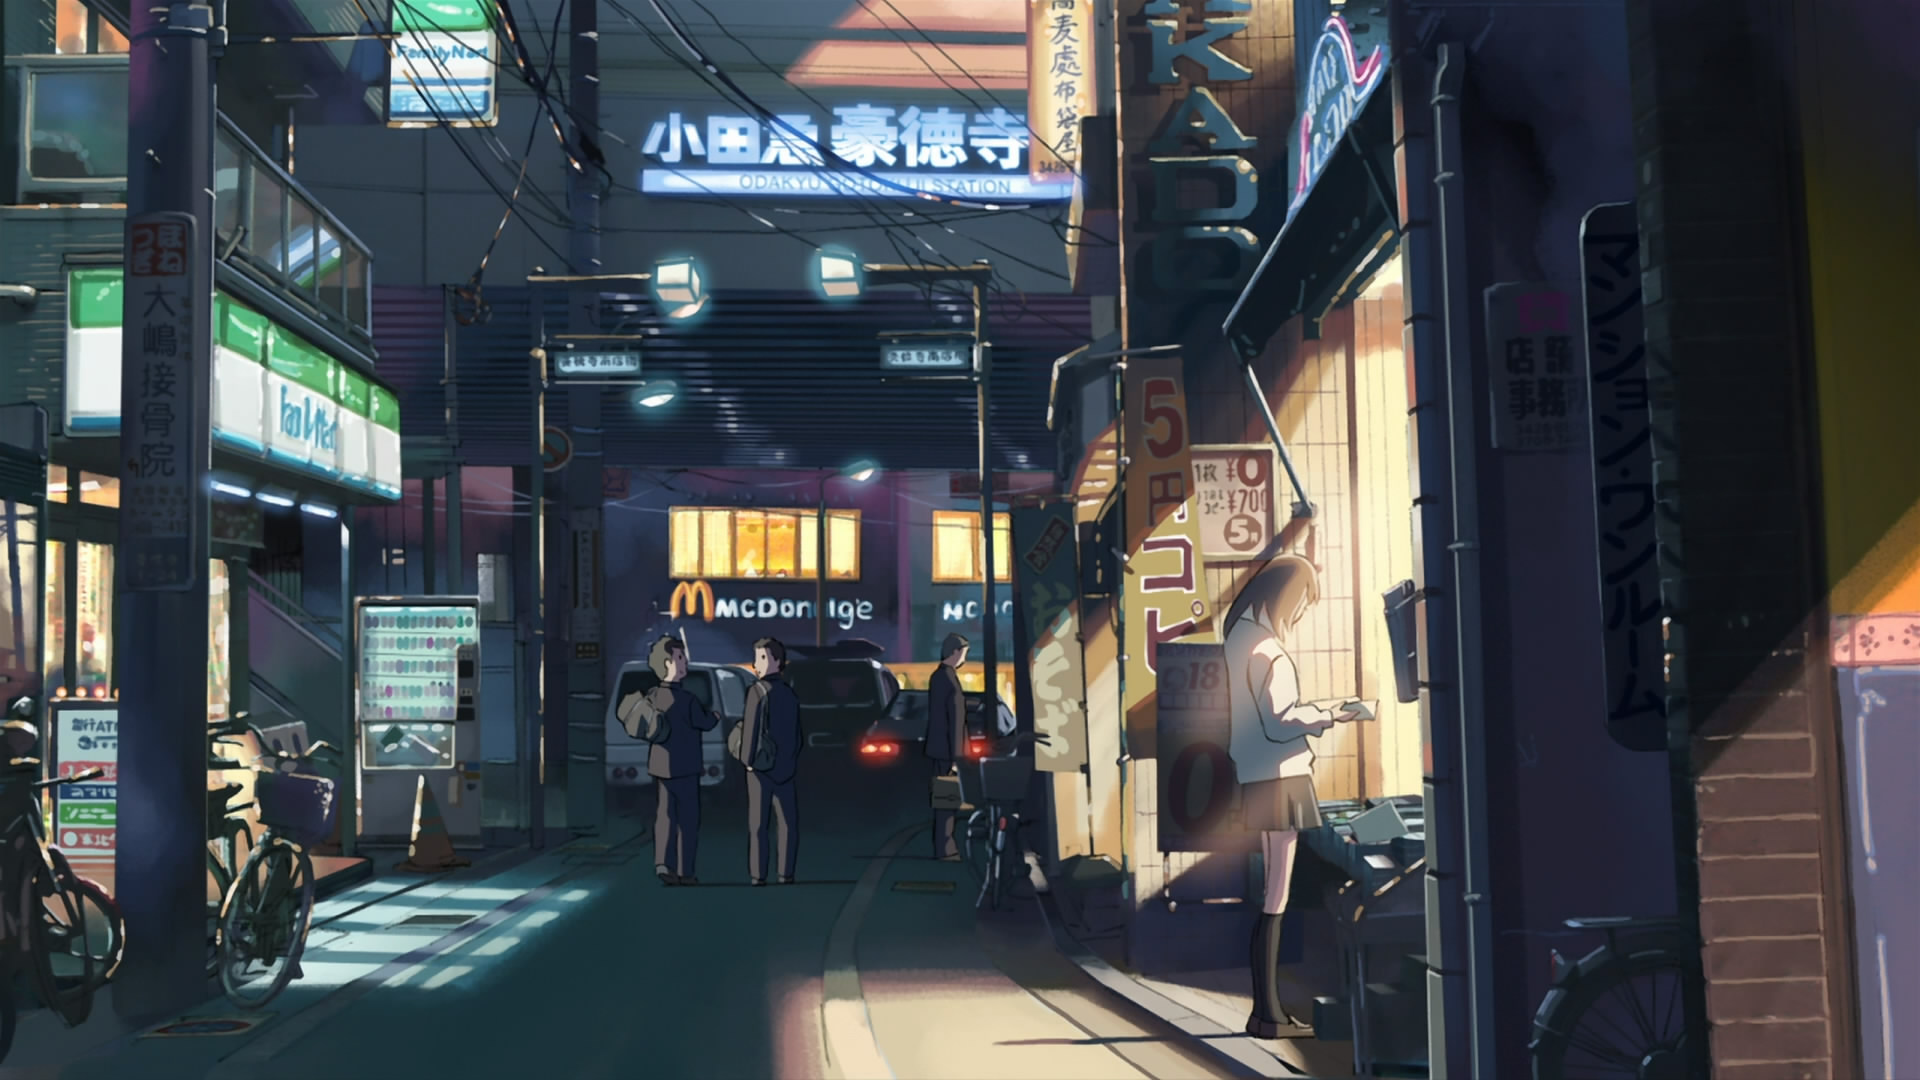 Mobile wallpaper 5 Centimeters Per Second Anime 237478 download the  picture for free